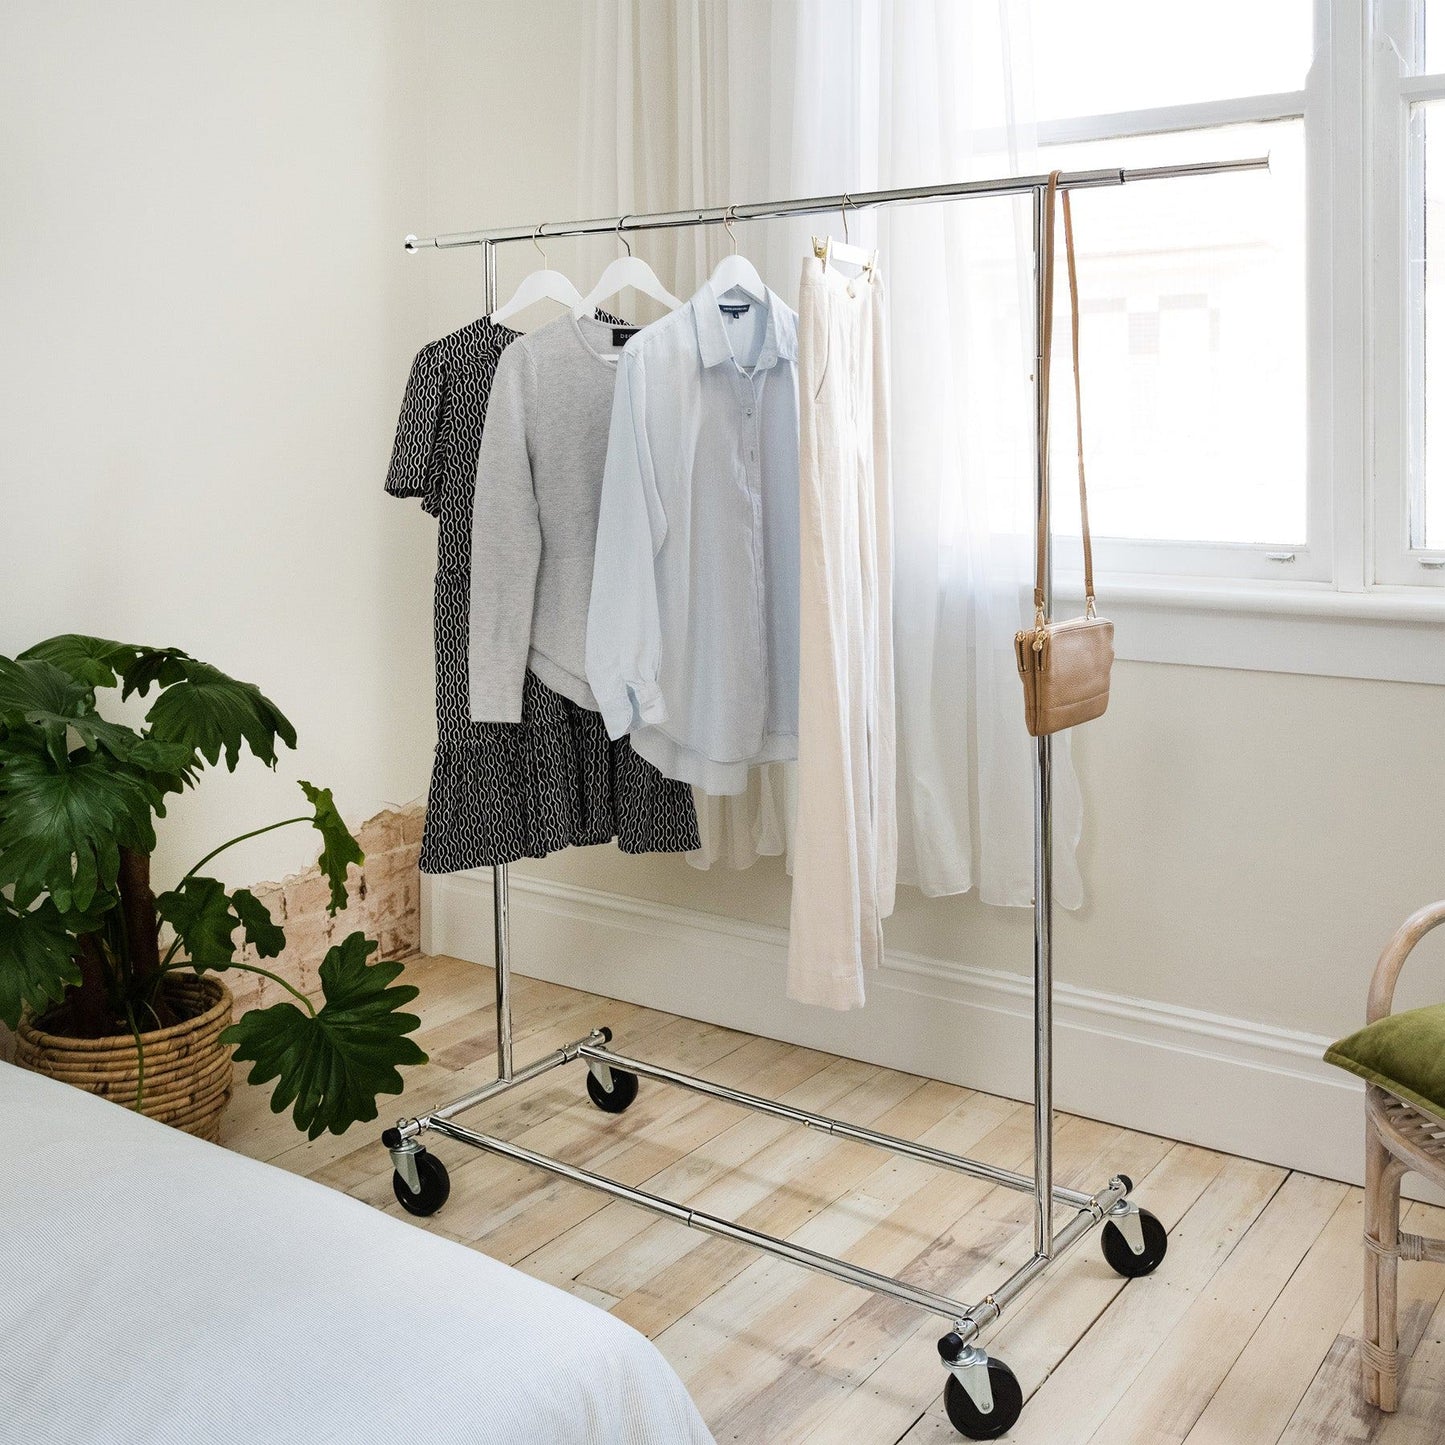 Standard Metal Clothes Rack -100kgs Weight Capacity - Heavy Duty With Four Large Rubber Casters